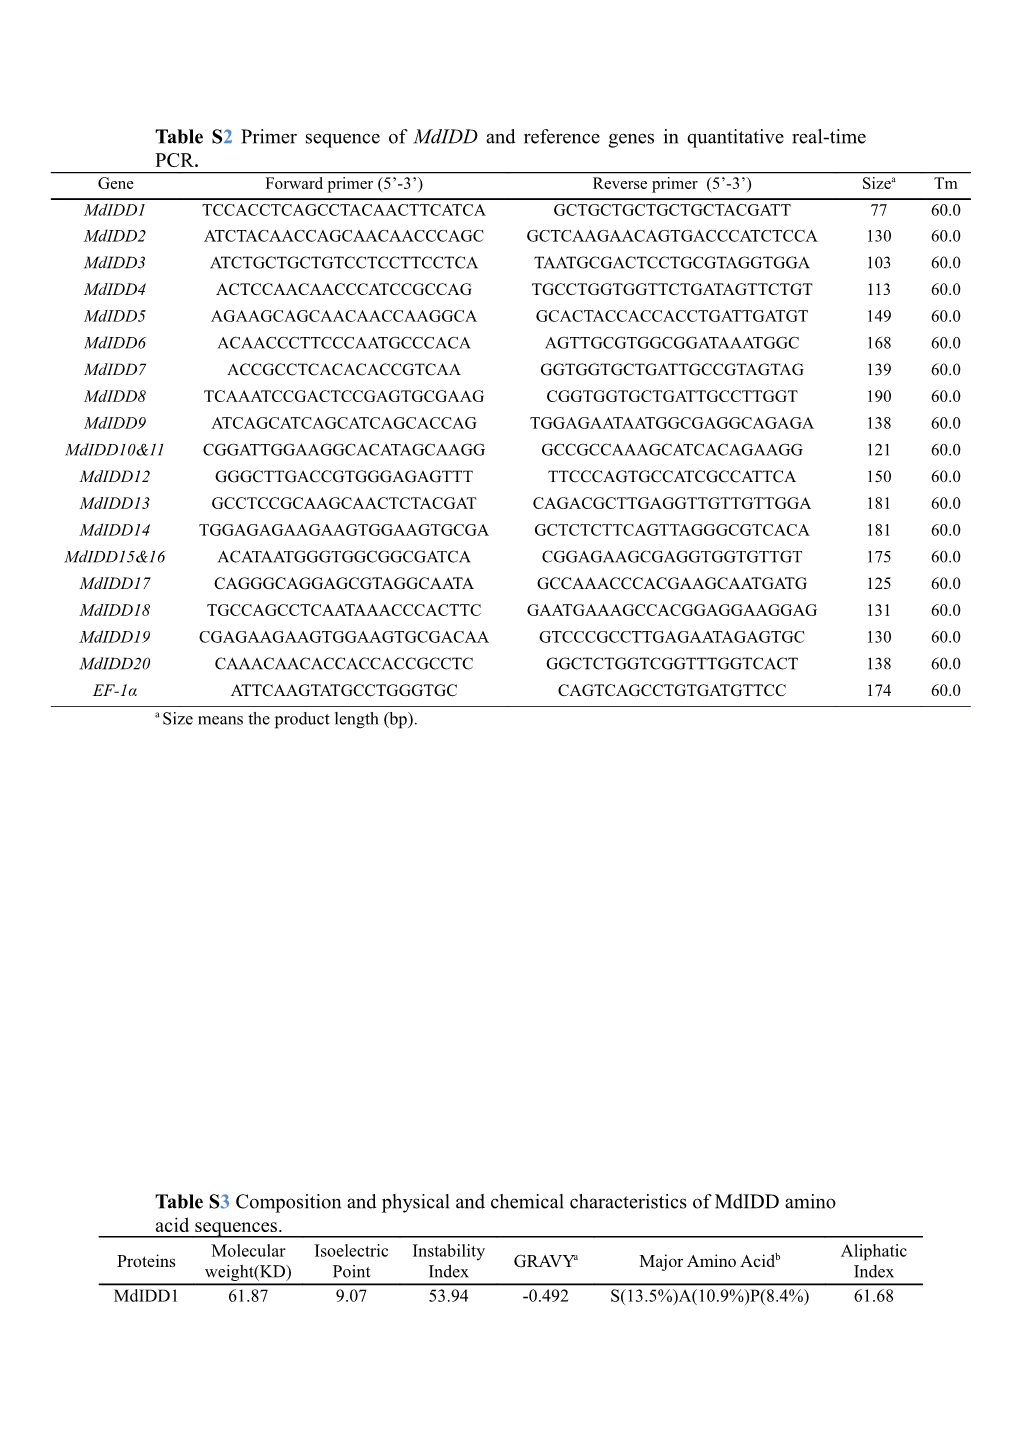 Table S2 Primer Sequence of Mdidd and Reference Genes in Quantitative Real-Time PCR